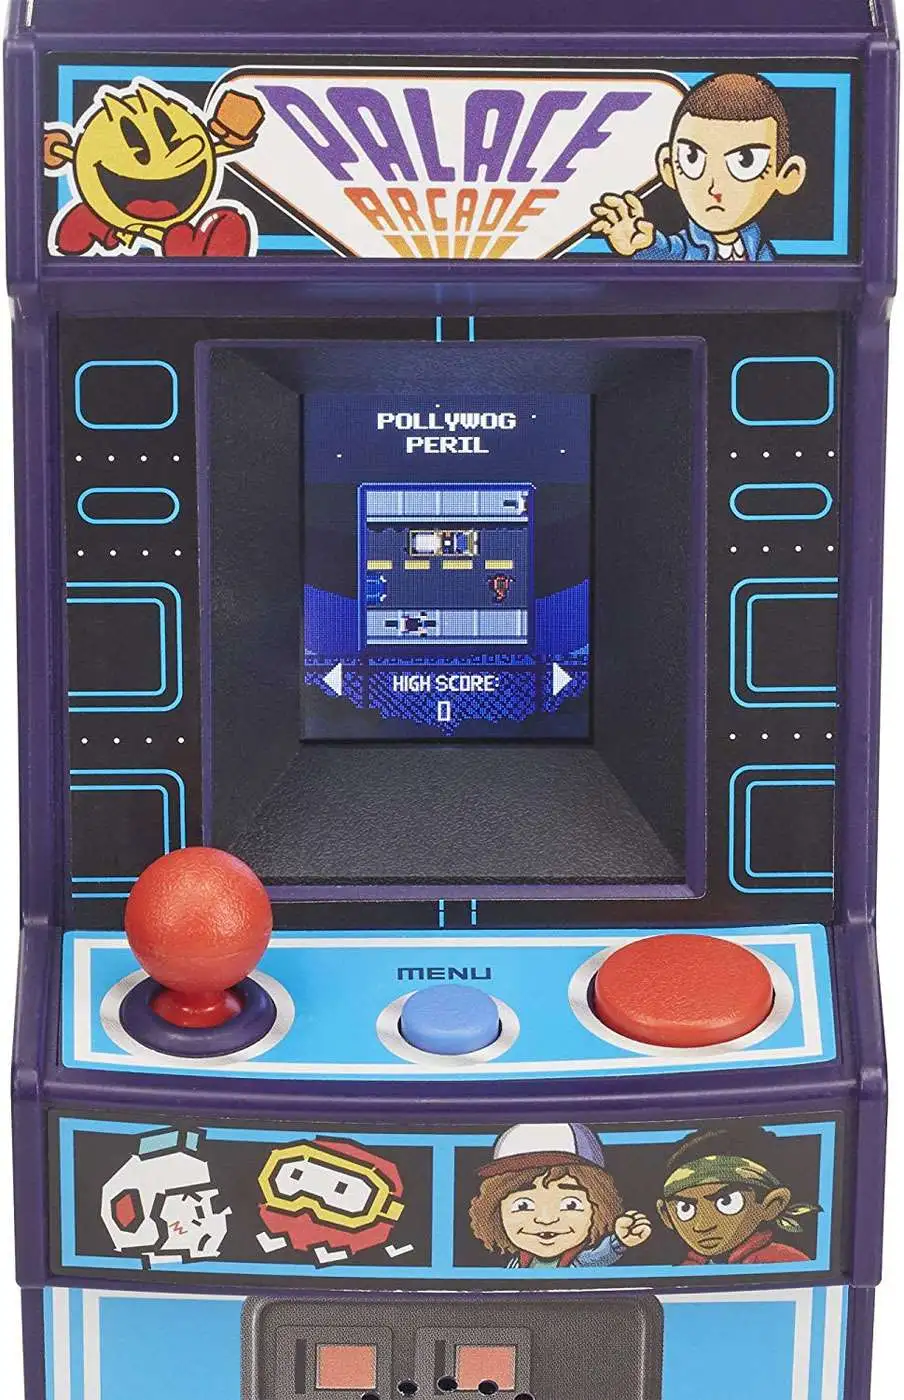 Multicoloured for sale online E5640 Hasbro Stranger Things Palace Arcade Handheld Electronic Game 